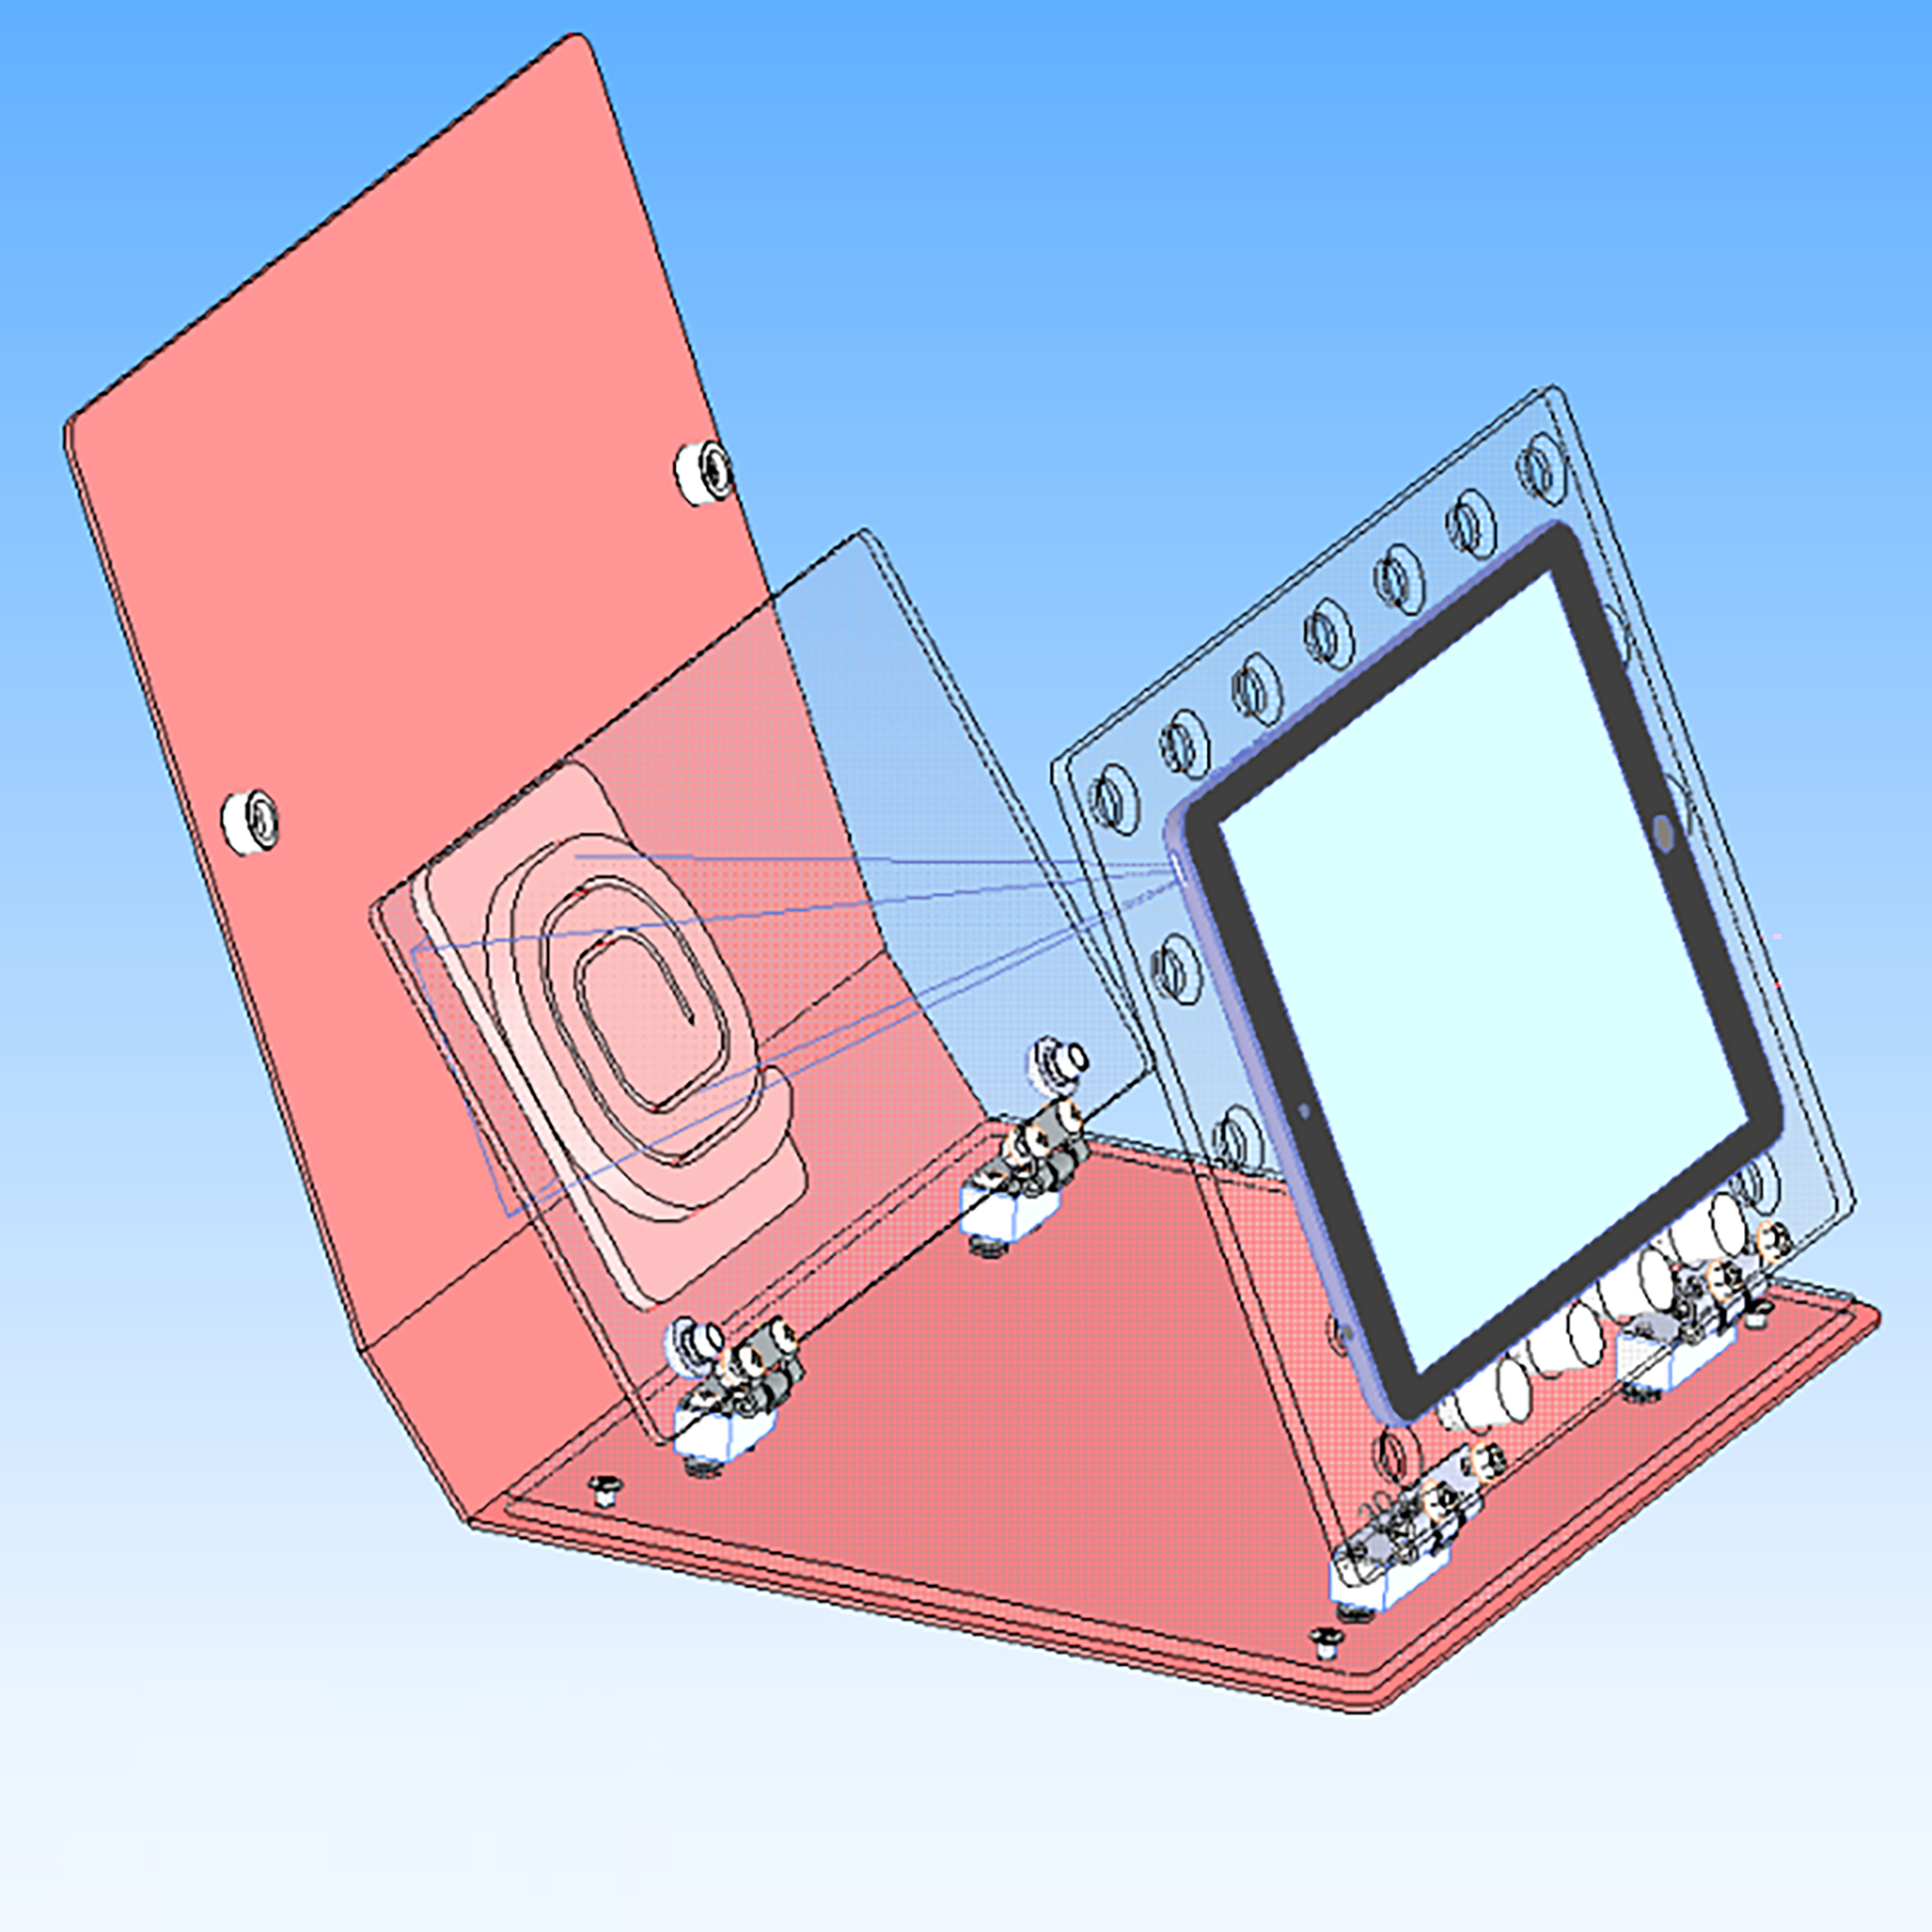 A digital illustration shows a tablet with its camera accessing the silicon suture pad beneath the clear laparoscopic wall. This is an example of how the Laparoscopic Binder works. 